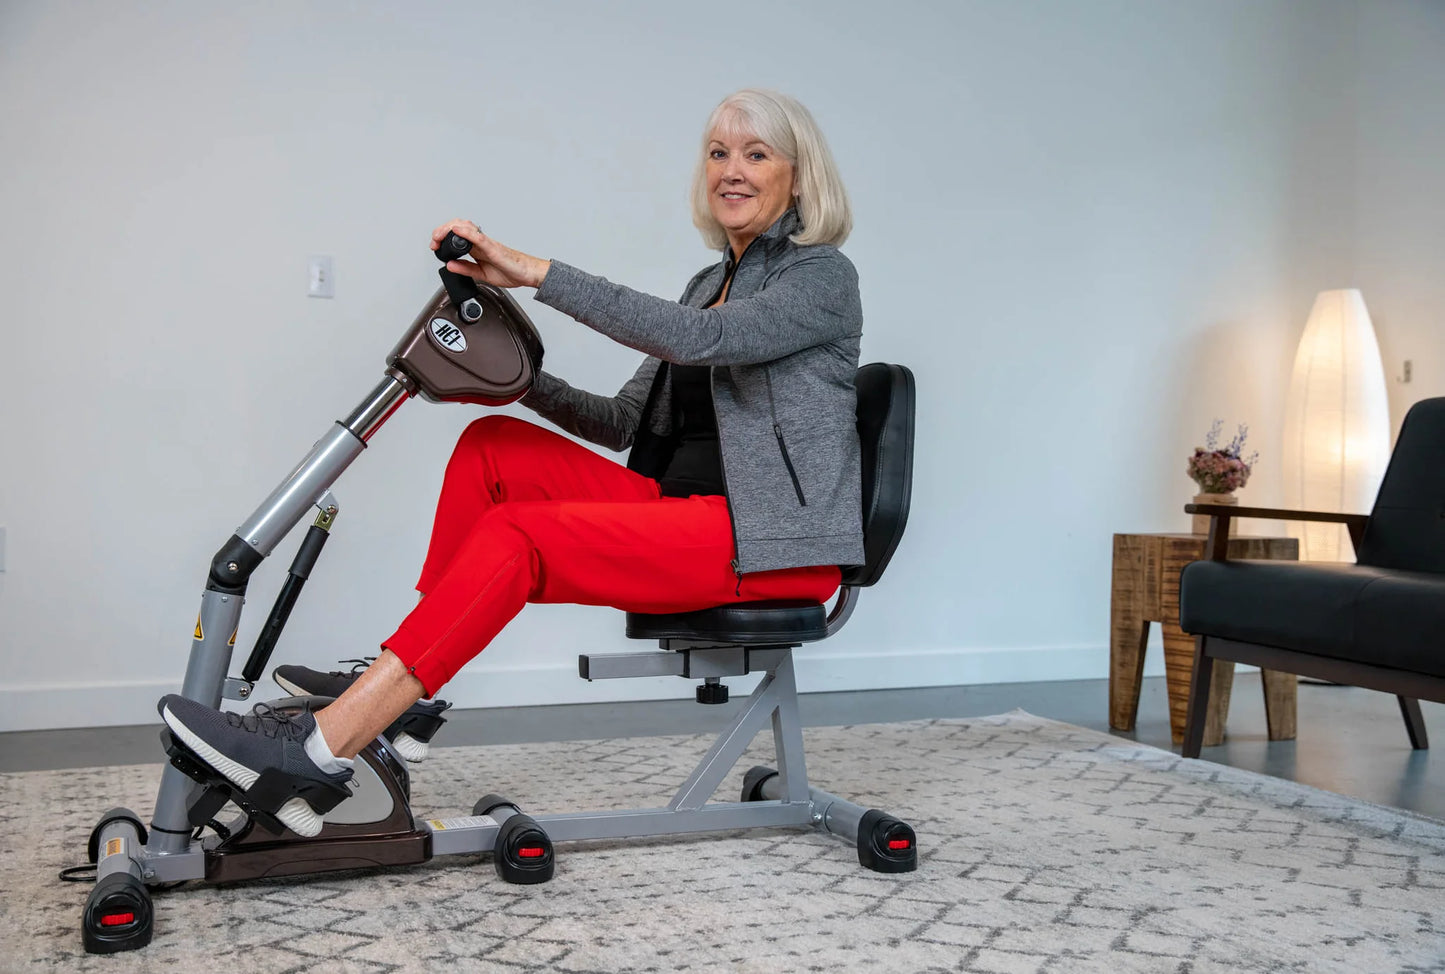 MobilityPro Plus Motorized Upper and Lower Body Exercise System